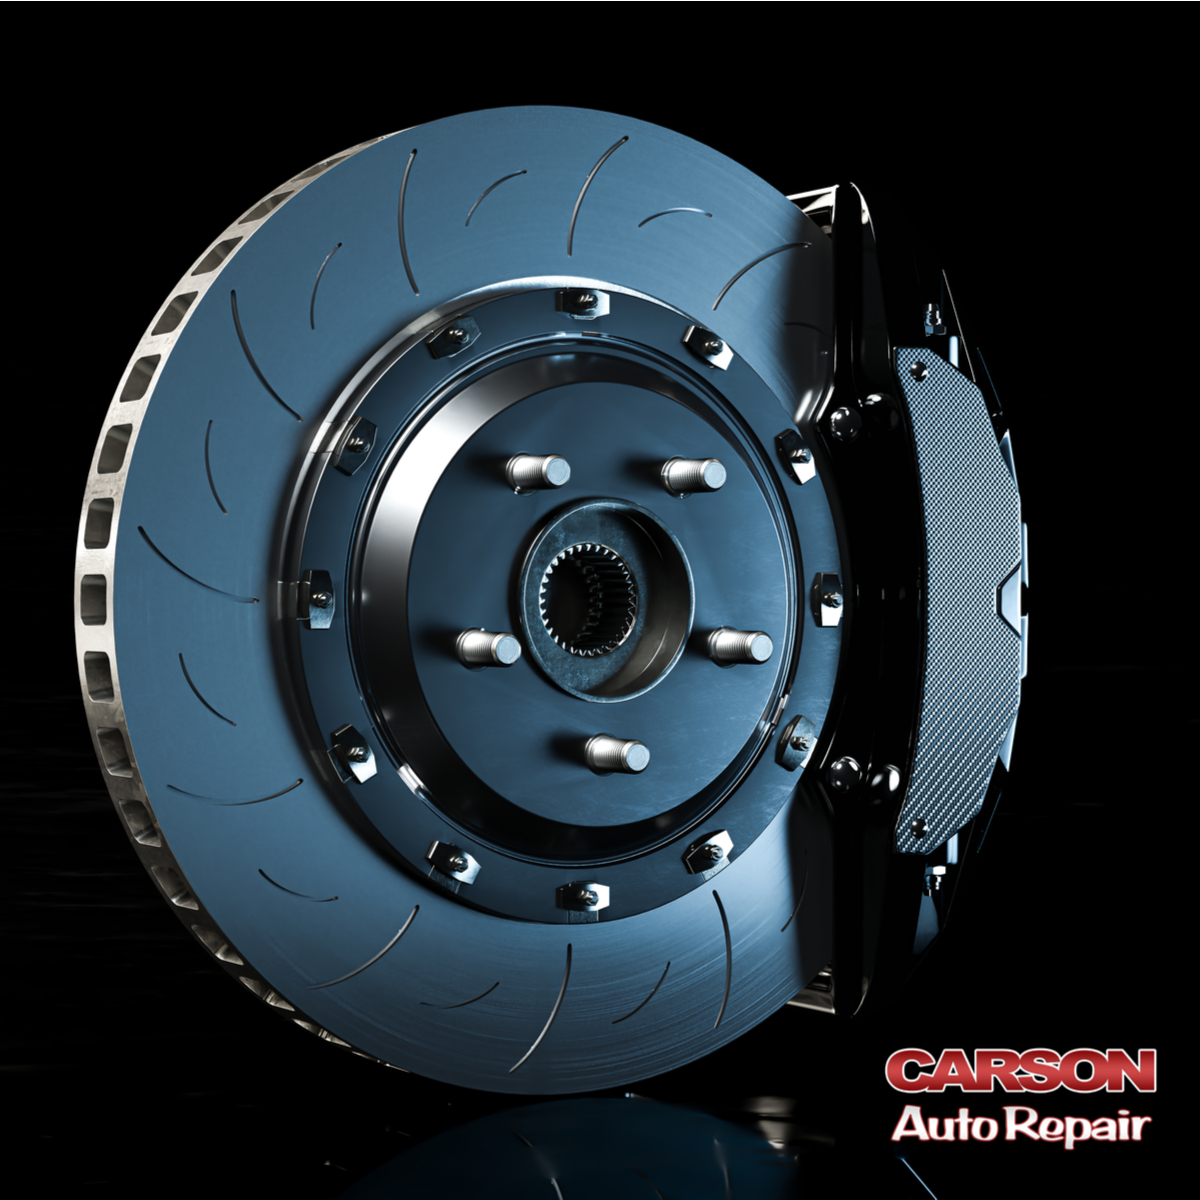 Get Your Next Brake Service Here with Help from Reliable Technicians!